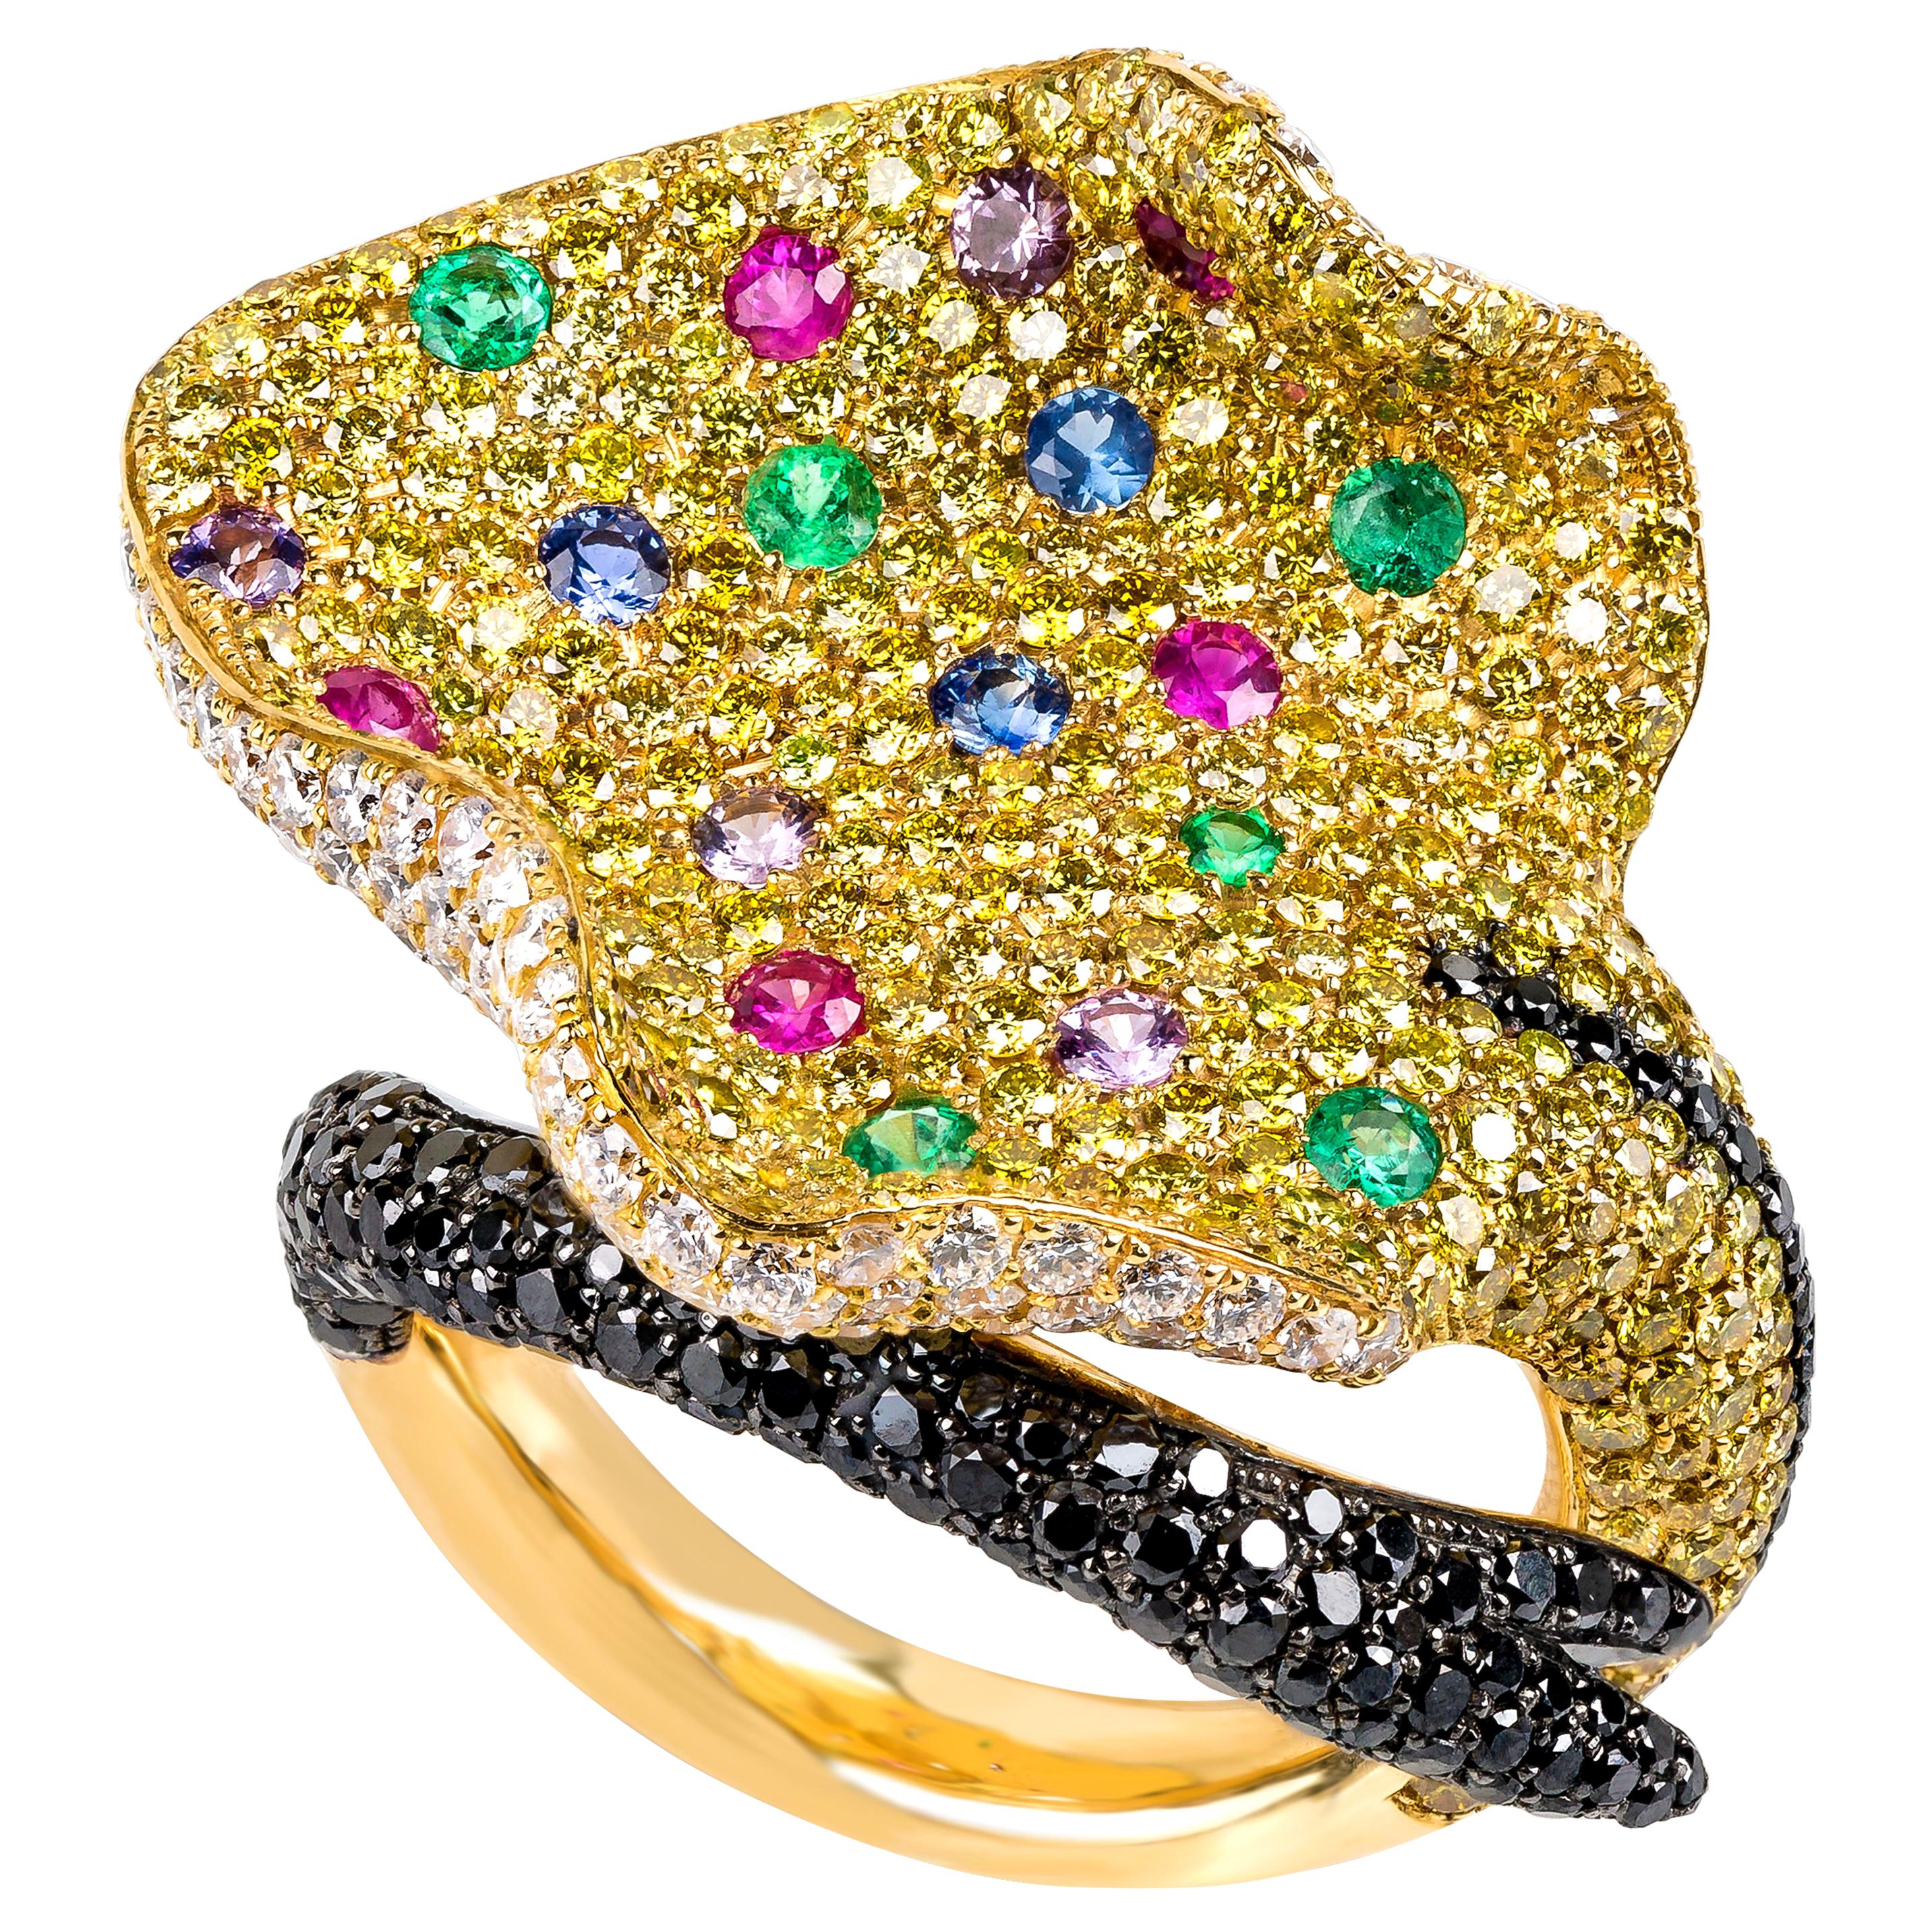 Contemporary Yellow Gold "Stingray" Ring with Diamonds, Emeralds and Sapphires